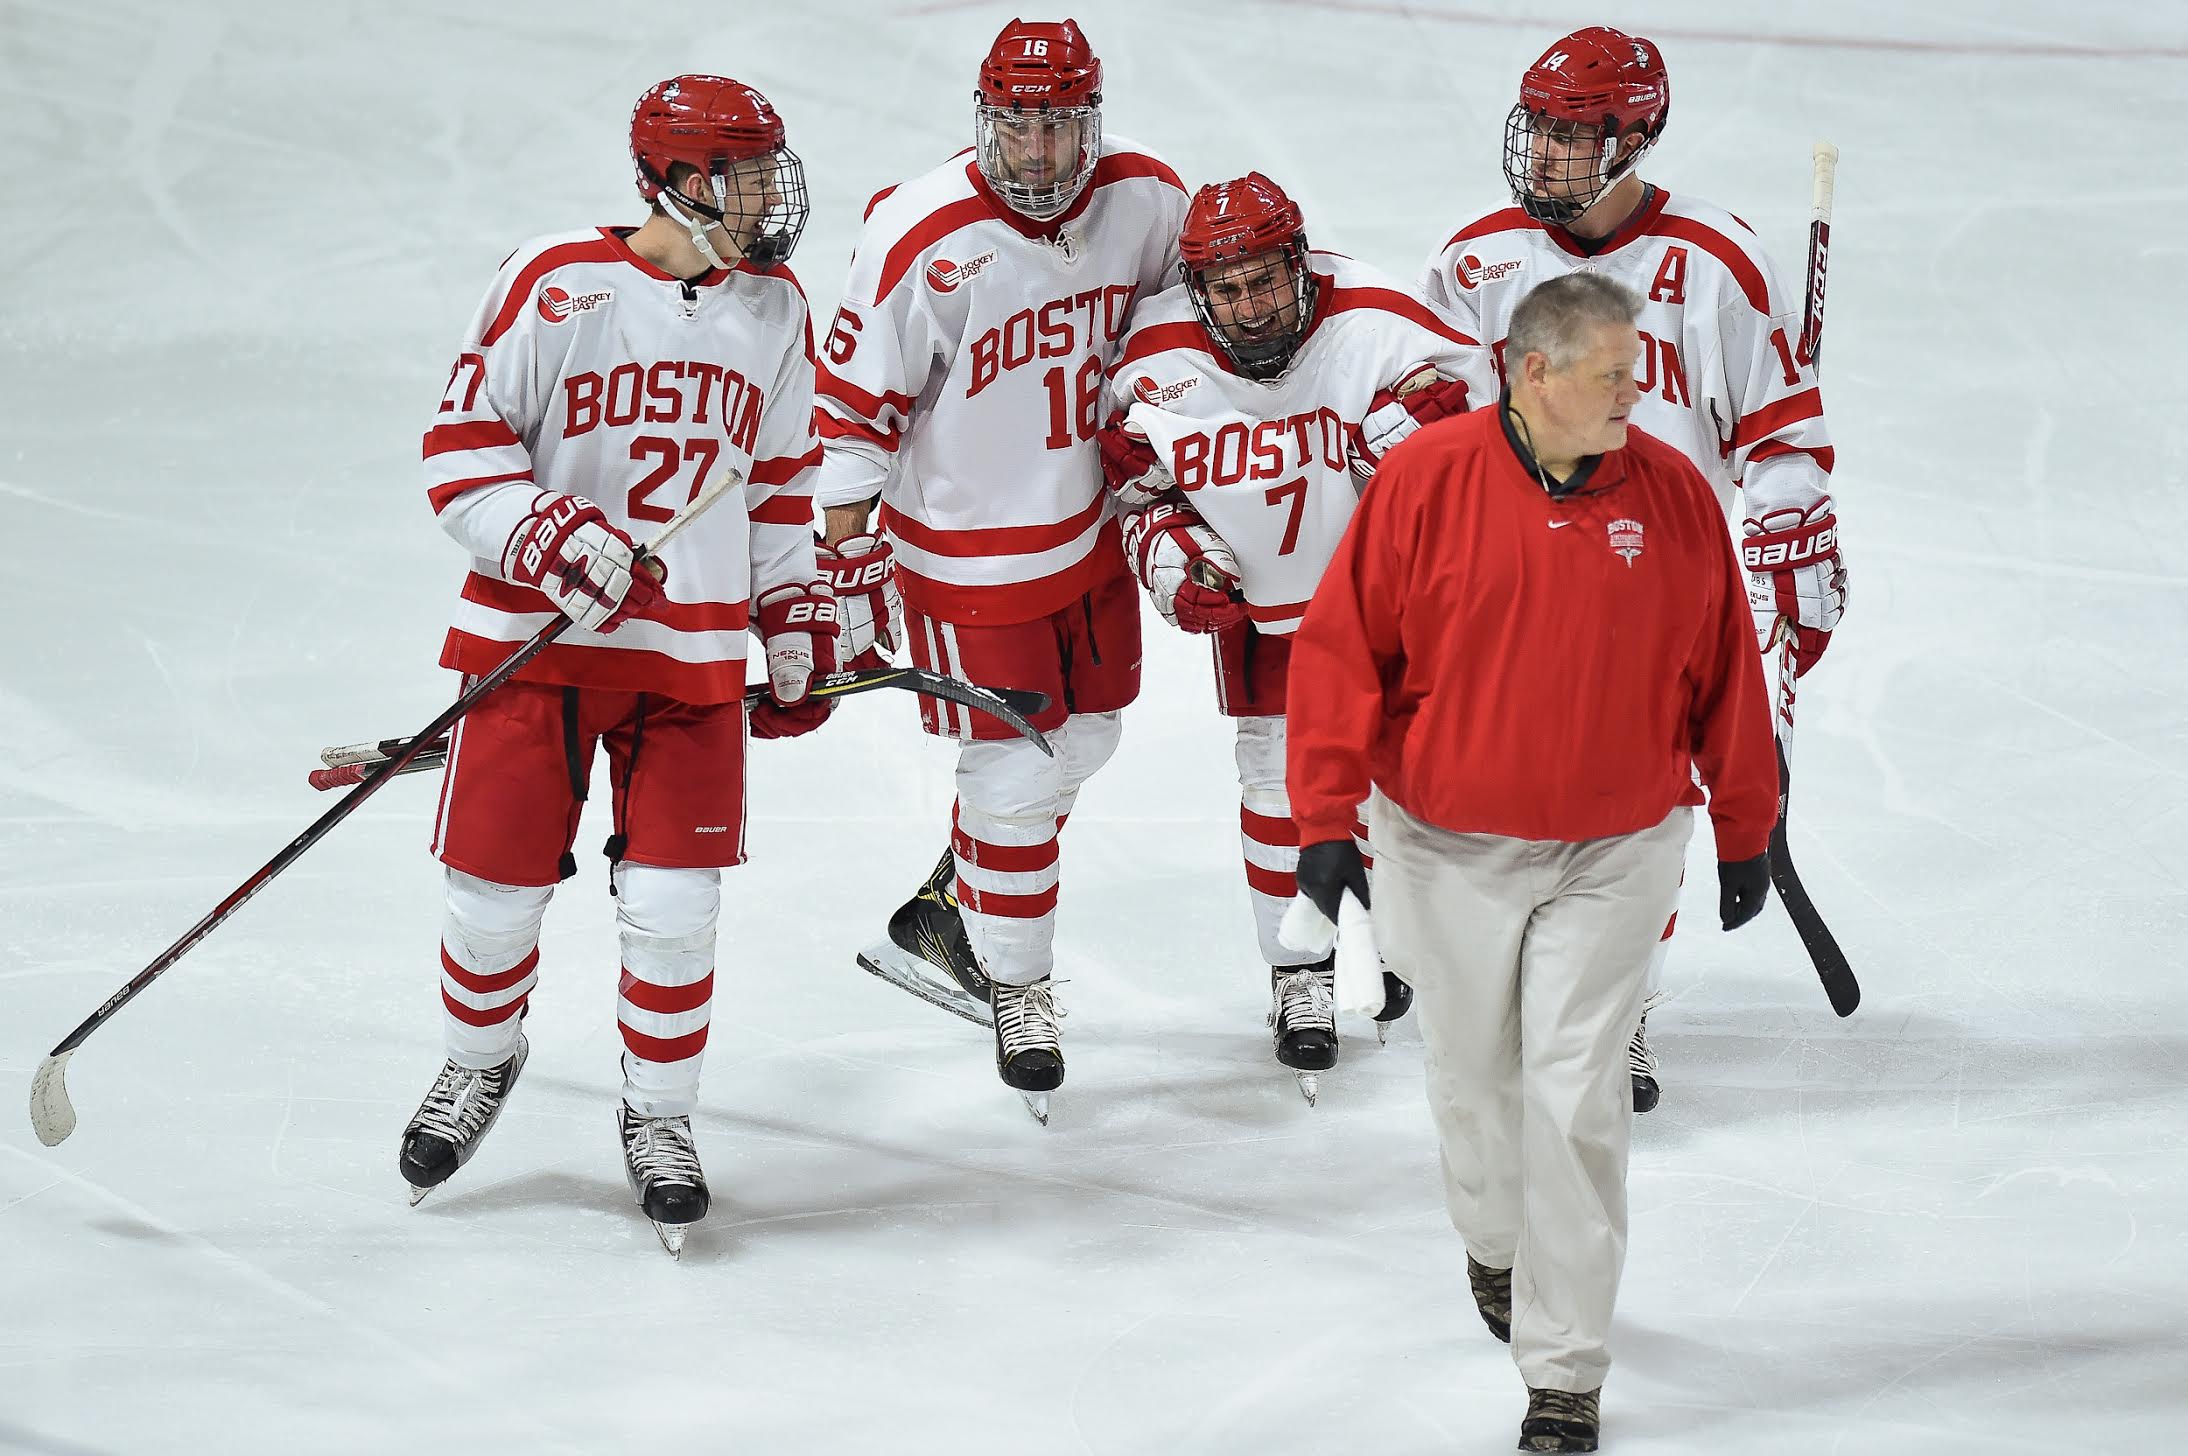 Chad Krys was helped off the ice, but returned back to the BU bench quickly. PHOTO BY MADDIE MALHOTRA/ DAILY FREE PRESS STAFF